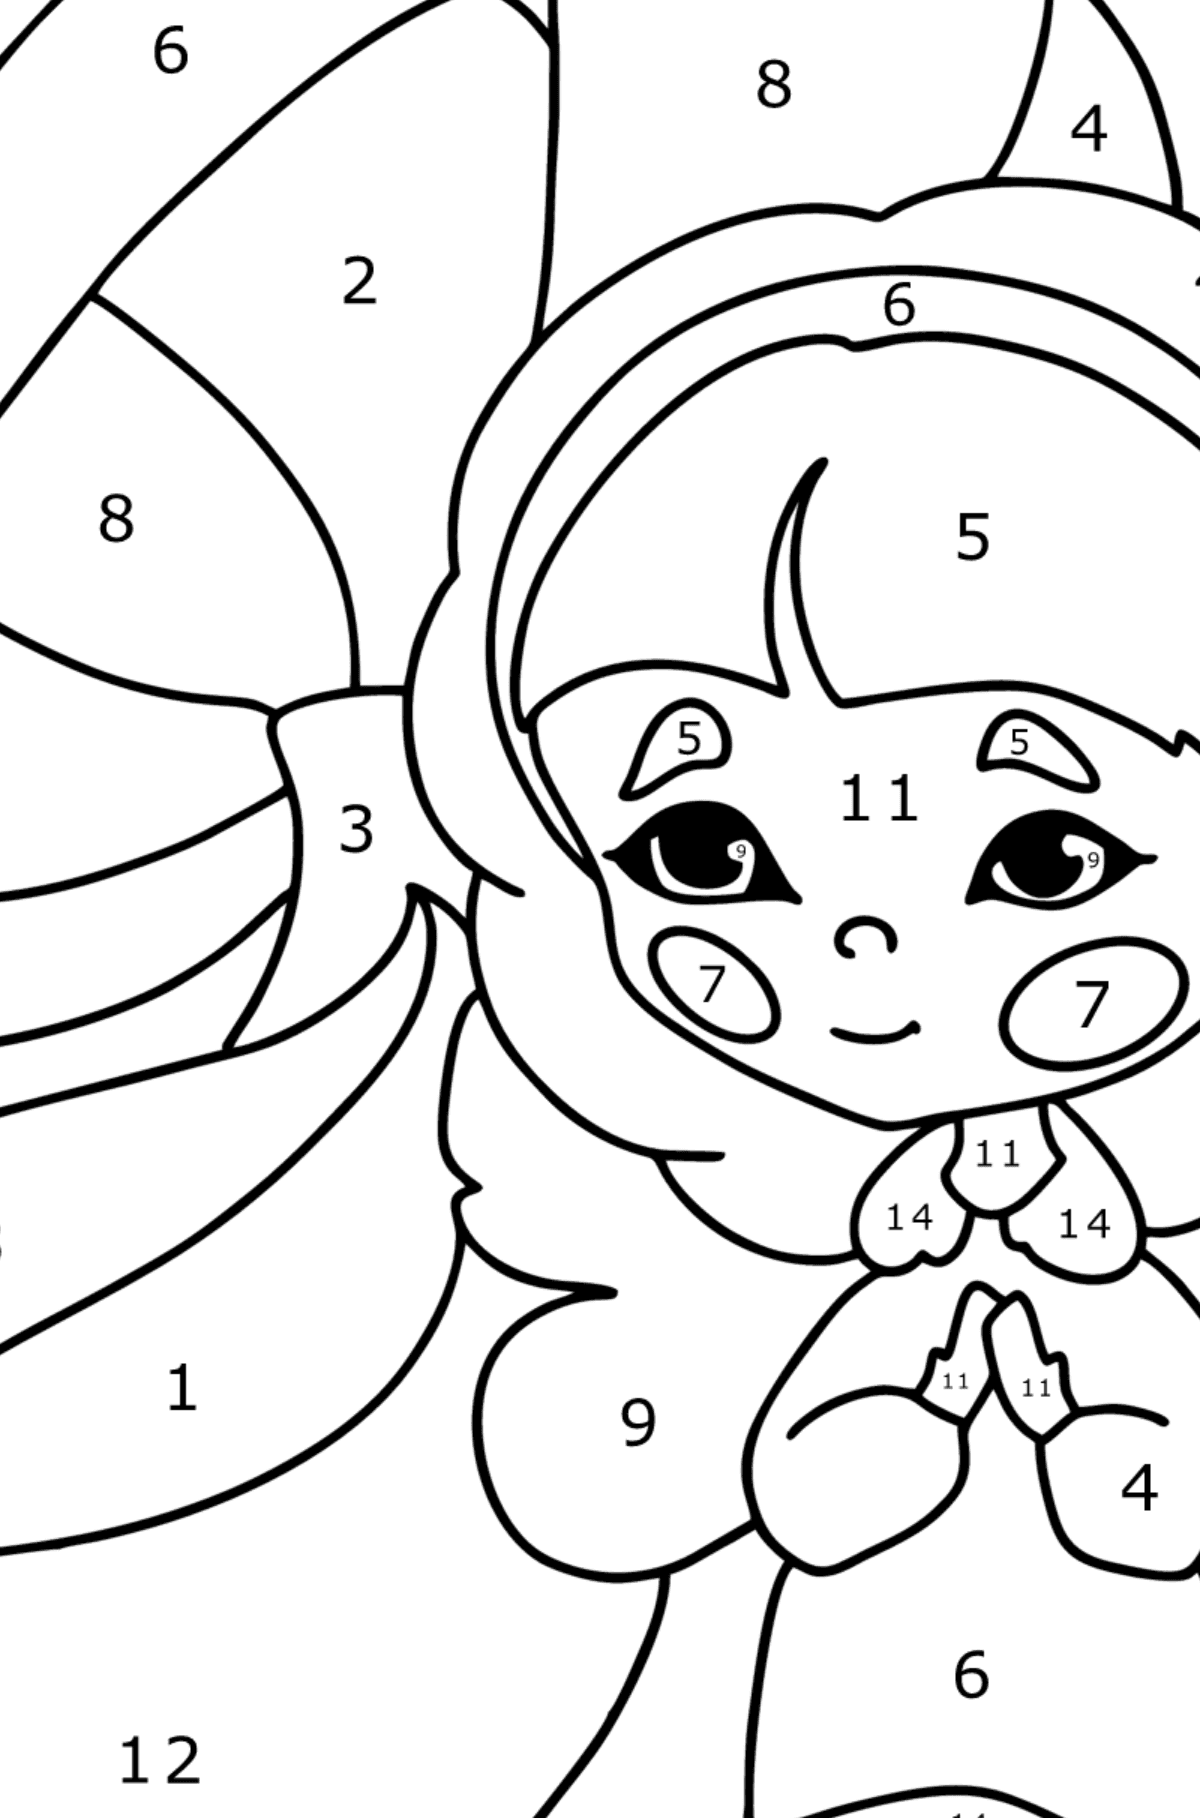 fairy and mushroom coloring page - Coloring by Numbers for Kids